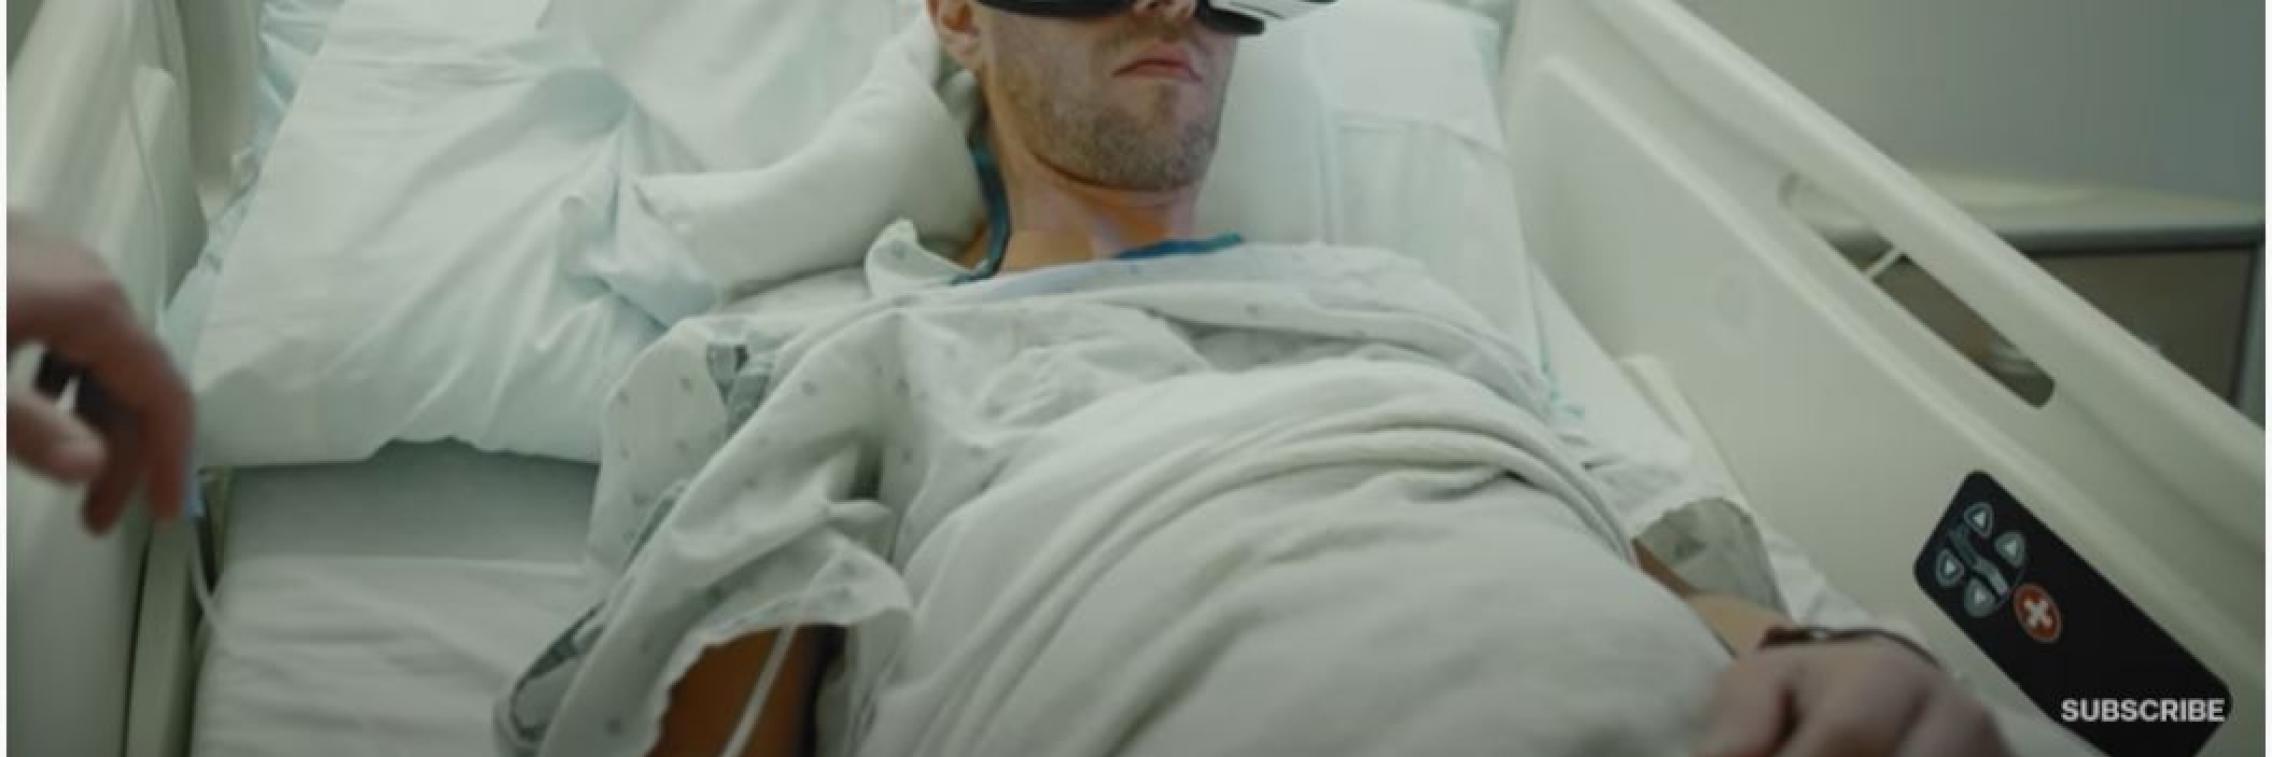 photo of patient with VR headset on in hospital bed